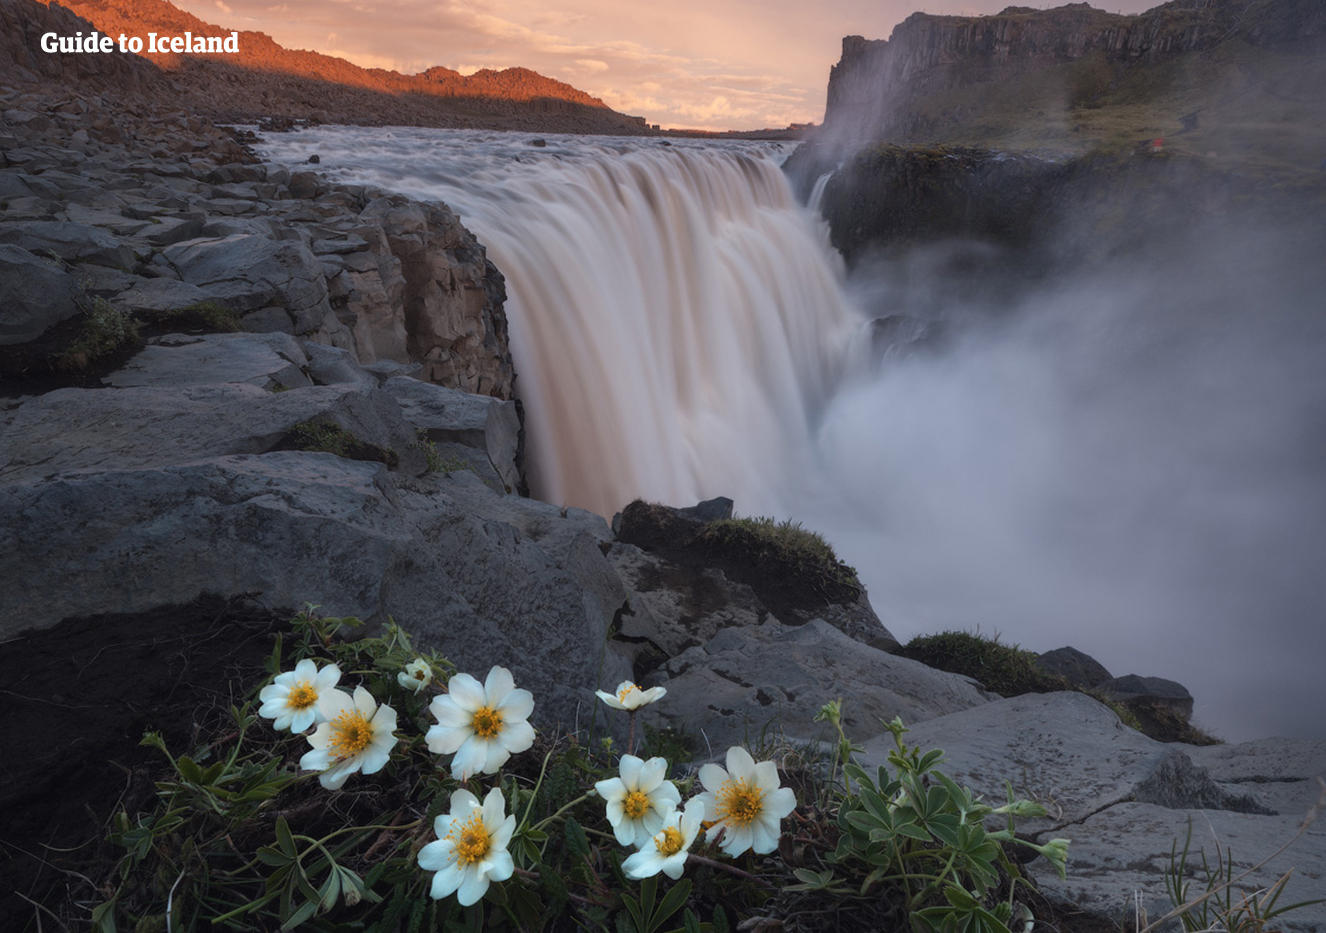 Dettifoss is one of the greatest features of Jokulsargljufur canyon.